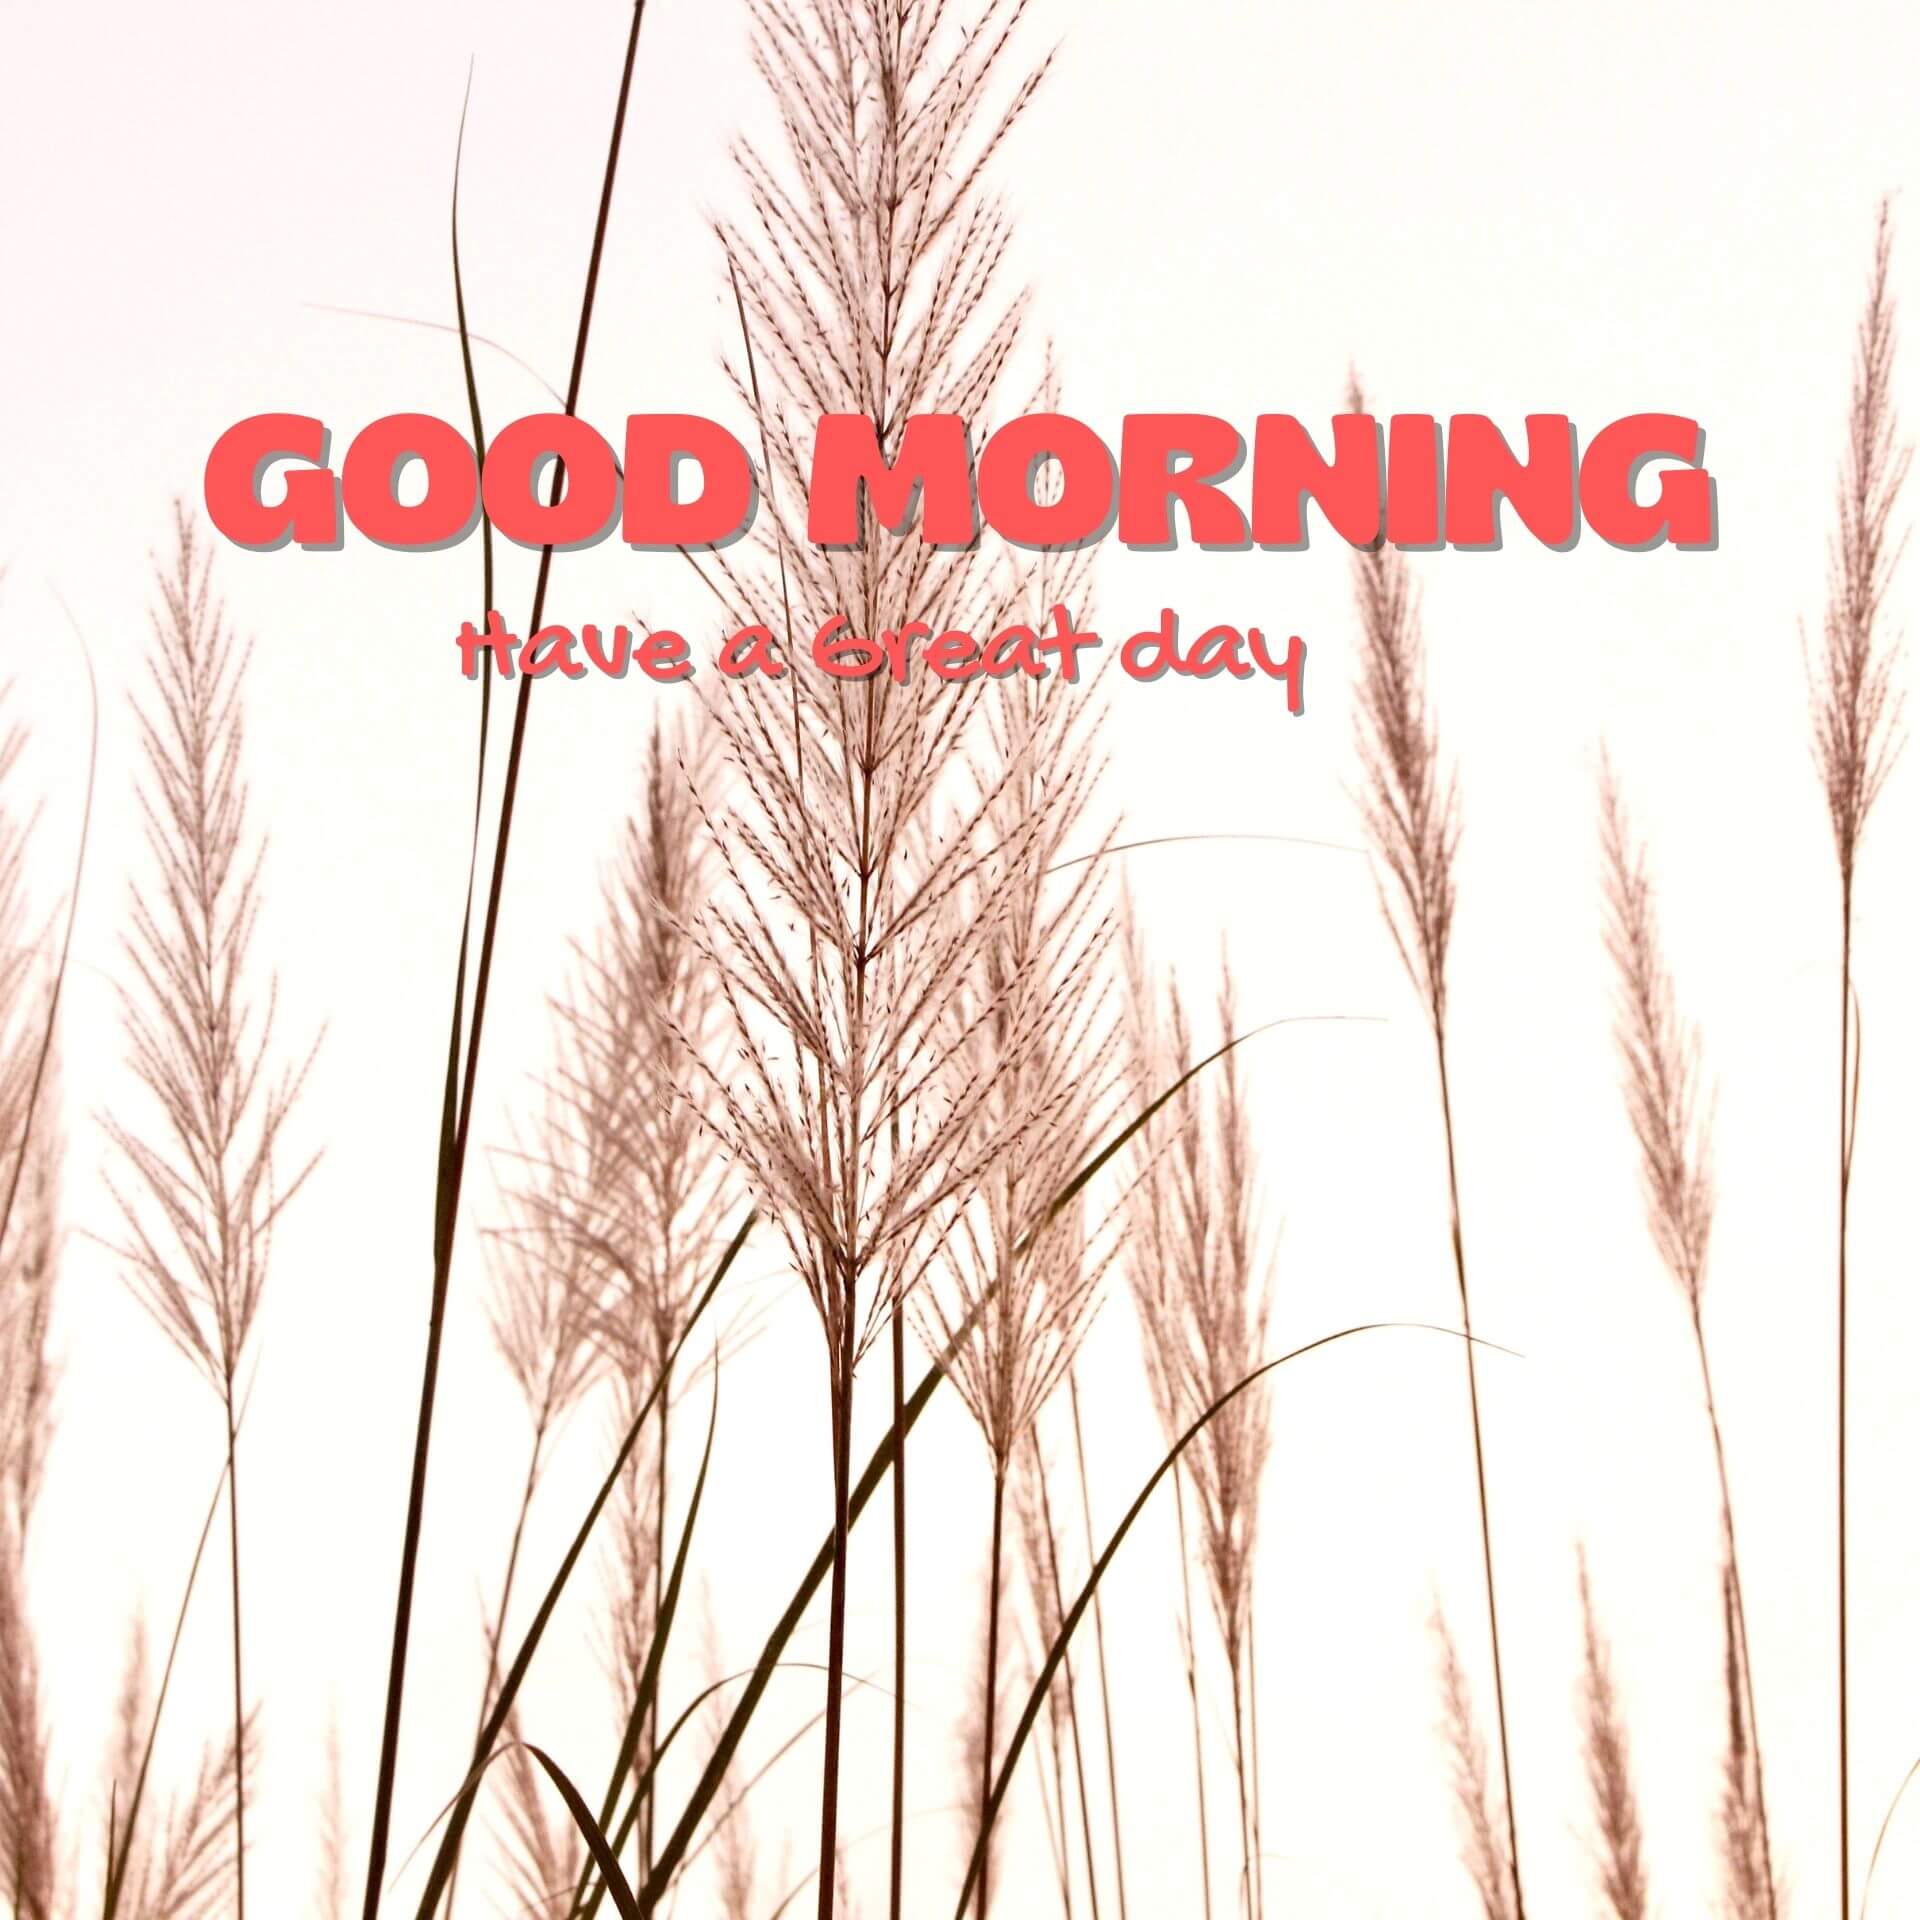 Good morning have a nice day Wallpaper pics Download 2023 2